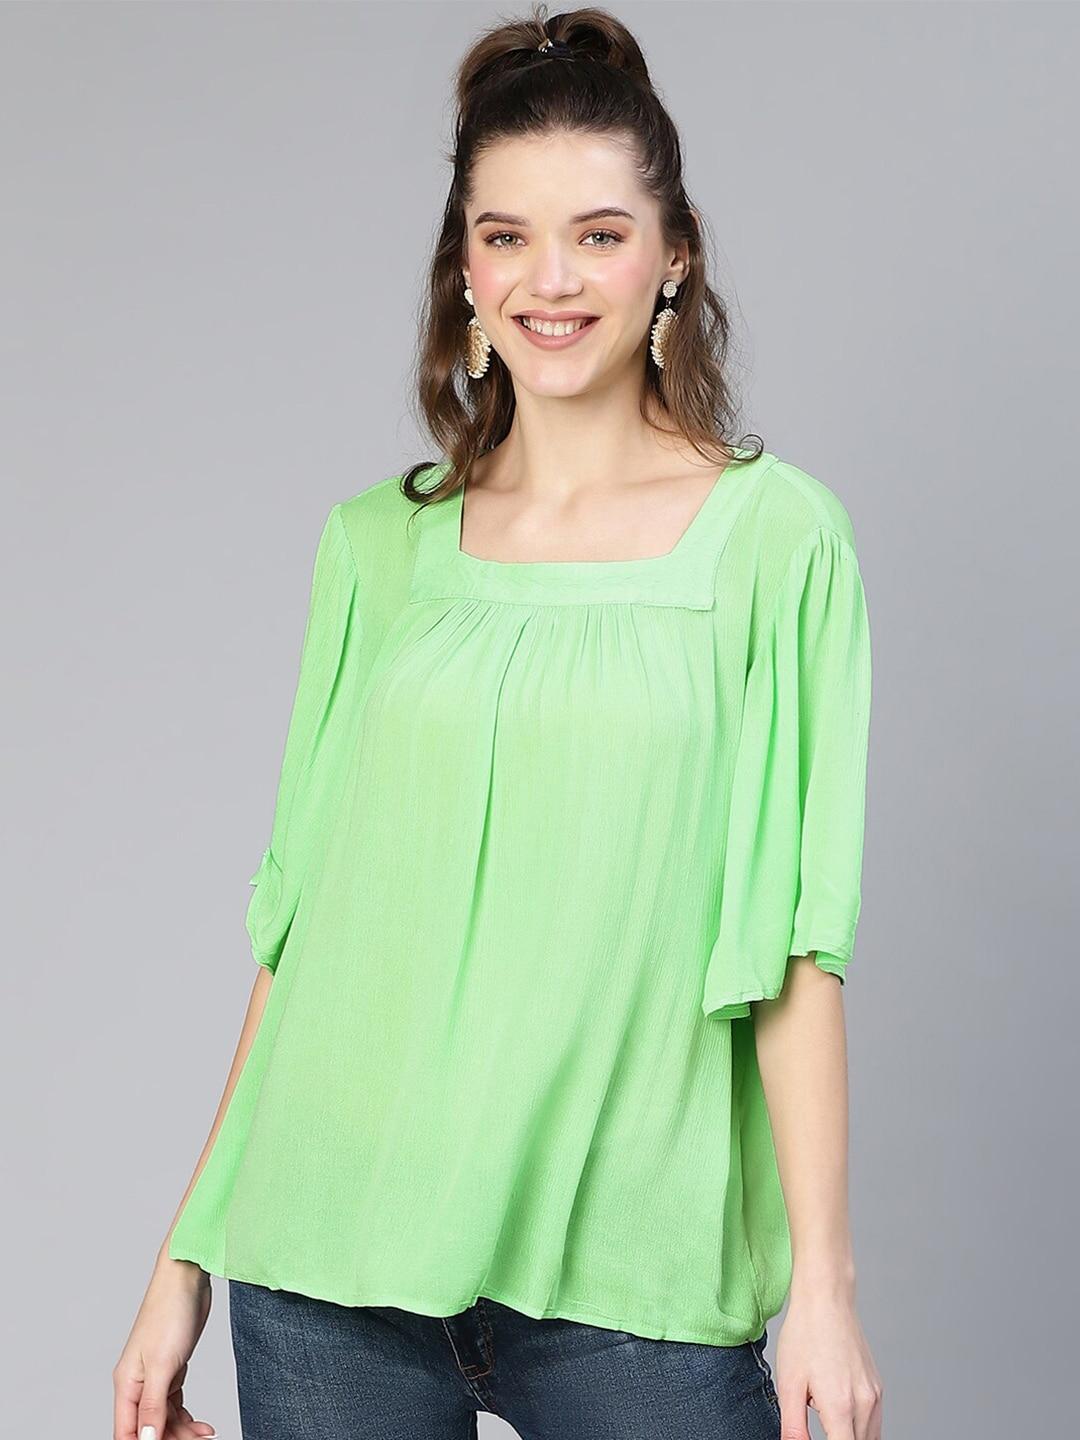 oxolloxo solid square neck flared sleeves a-line top